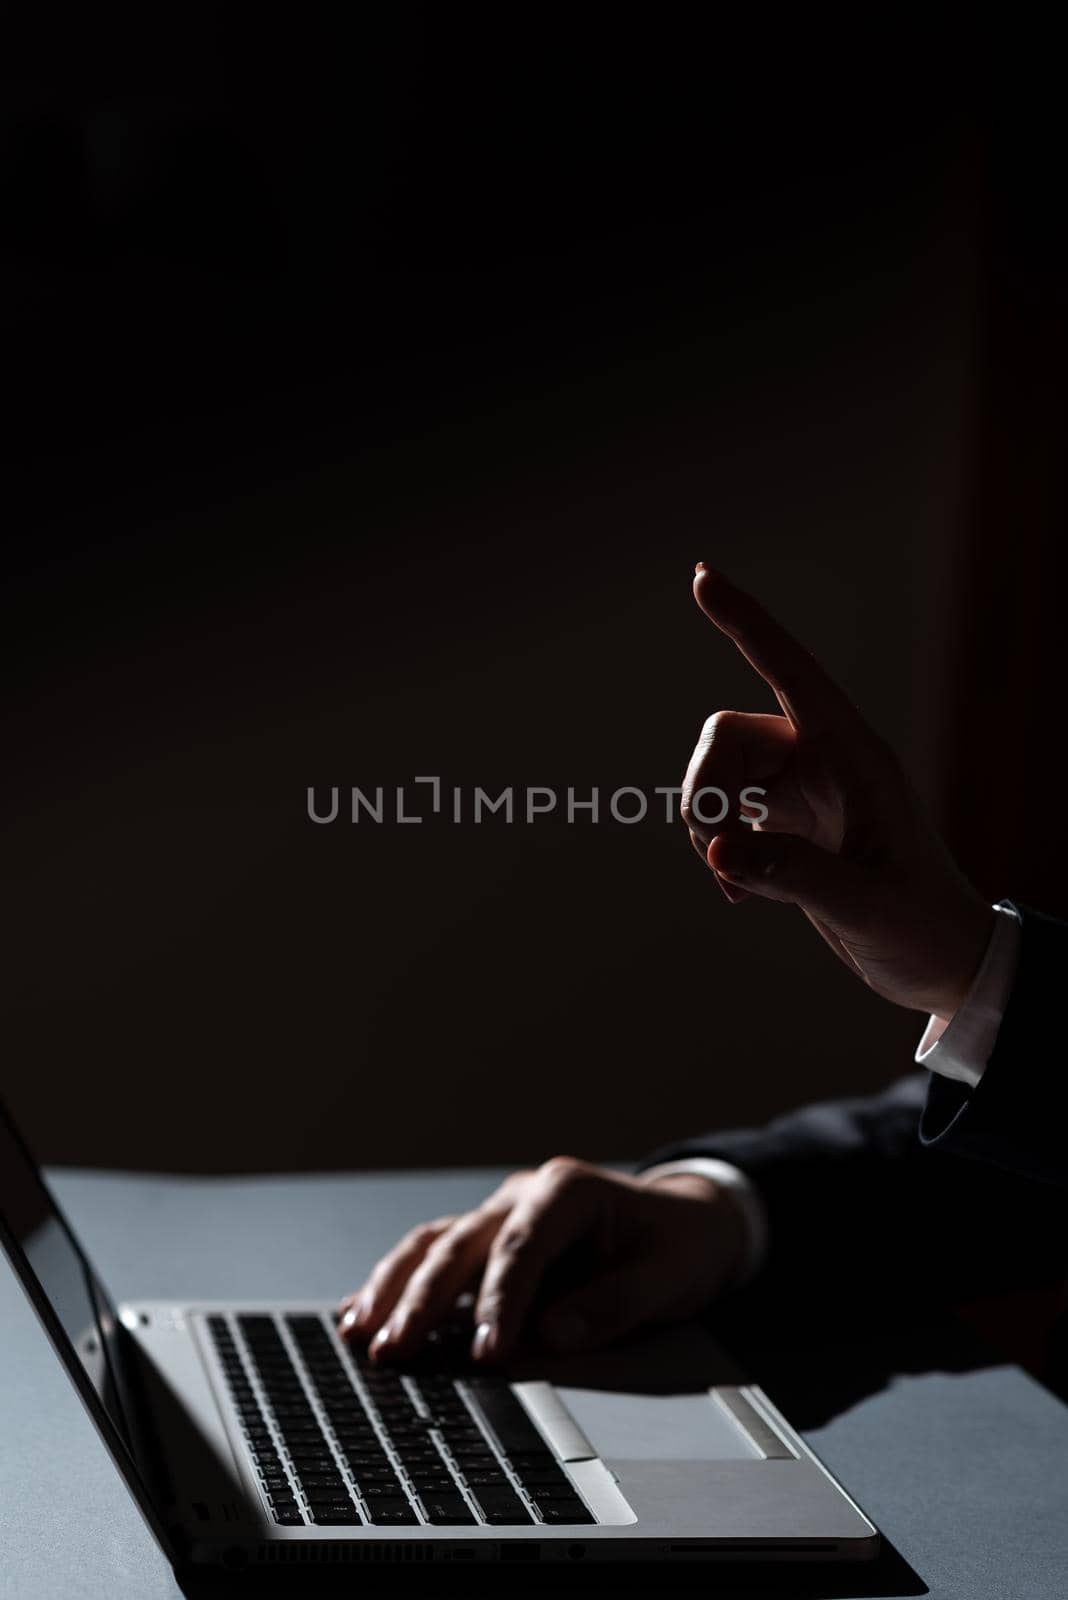 Man Typing On Lap Top And Woman Pointing With One Finger On Important News.